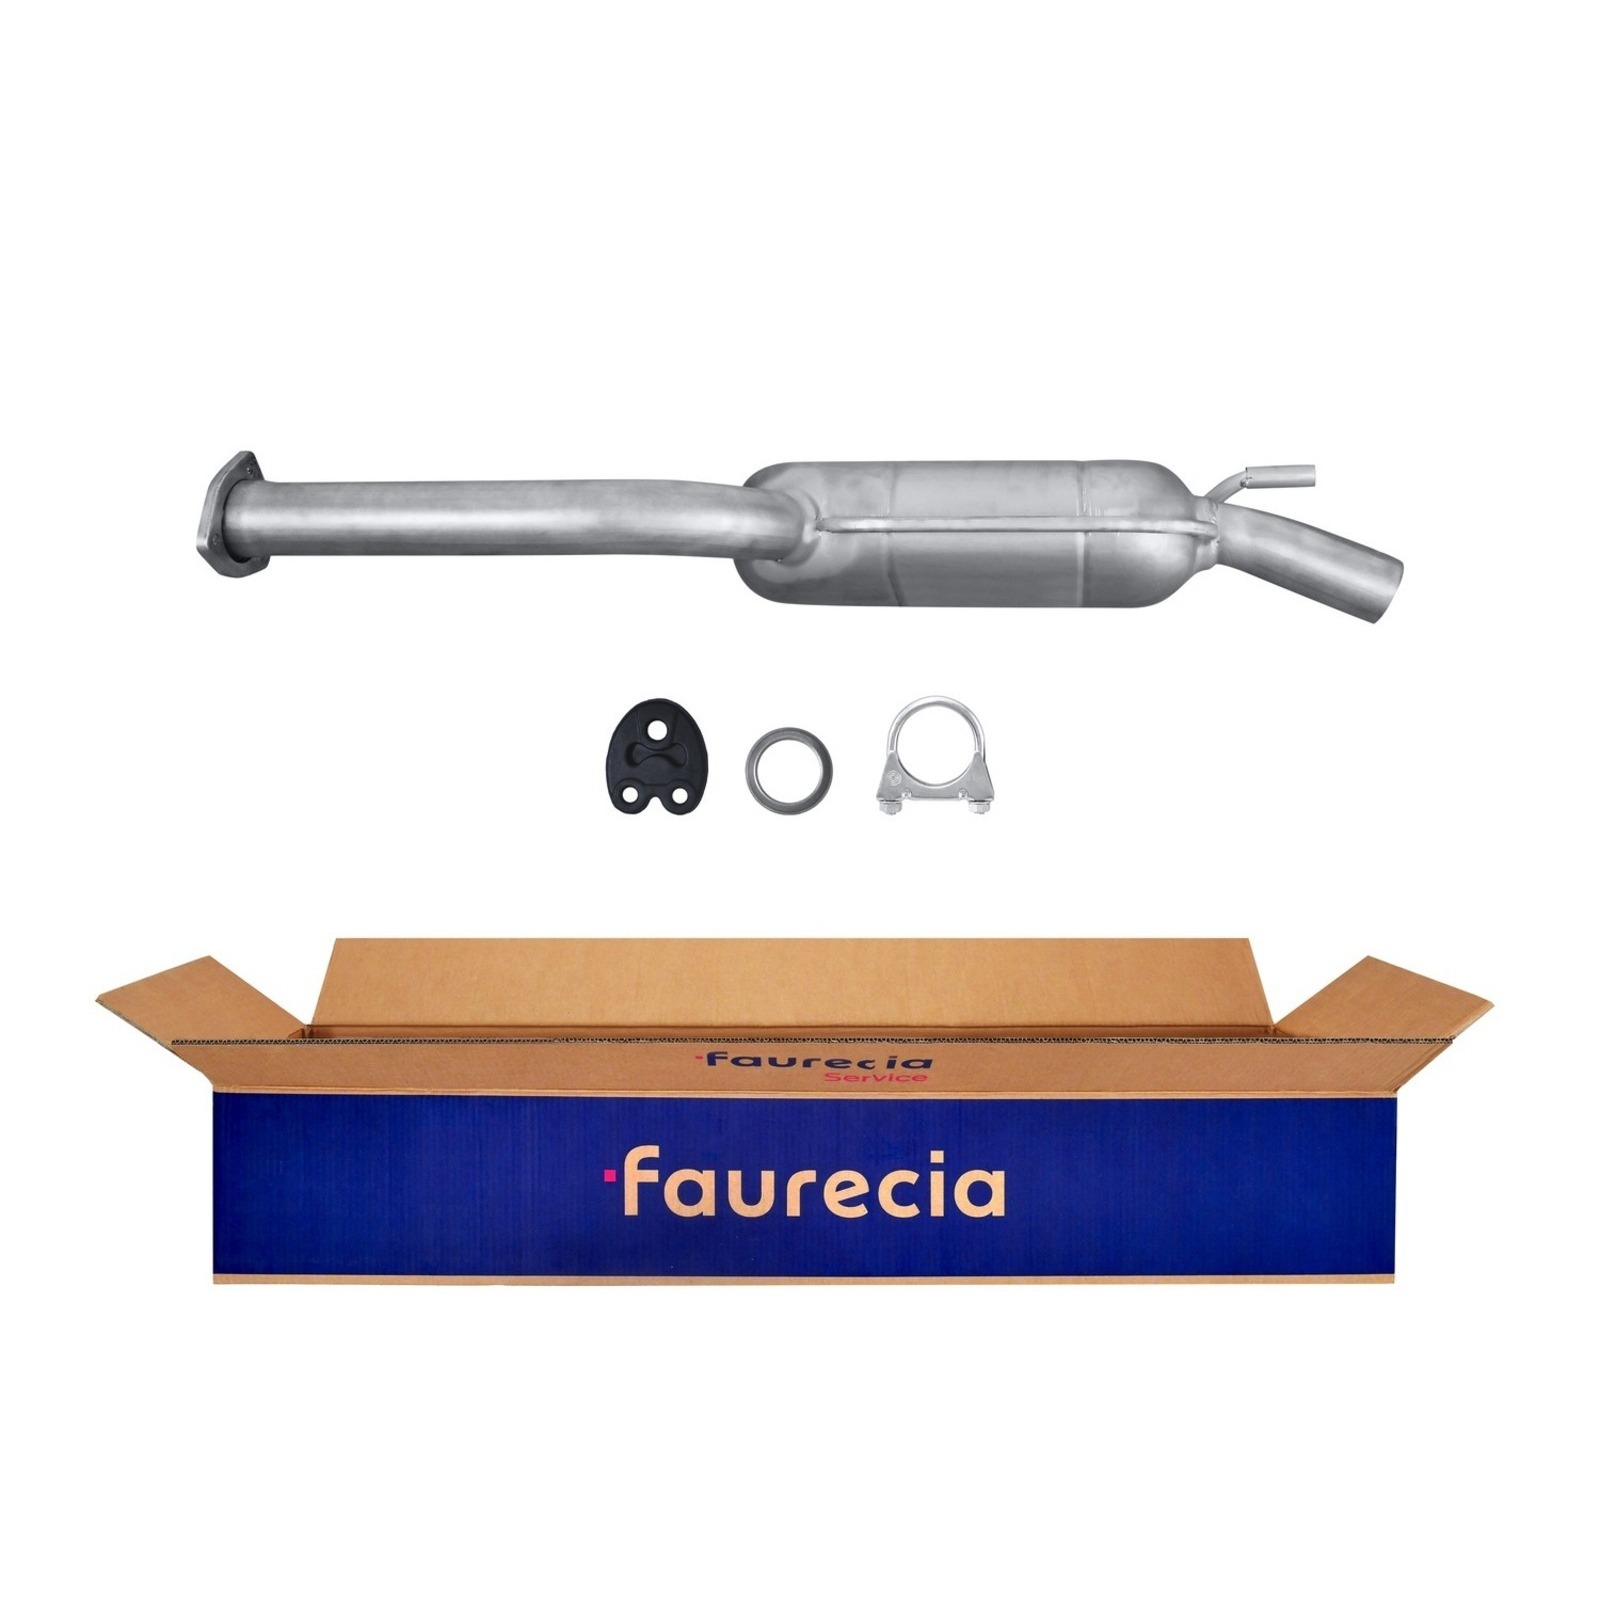 HELLA Centre Muffler Easy2Fit – PARTNERED with Faurecia